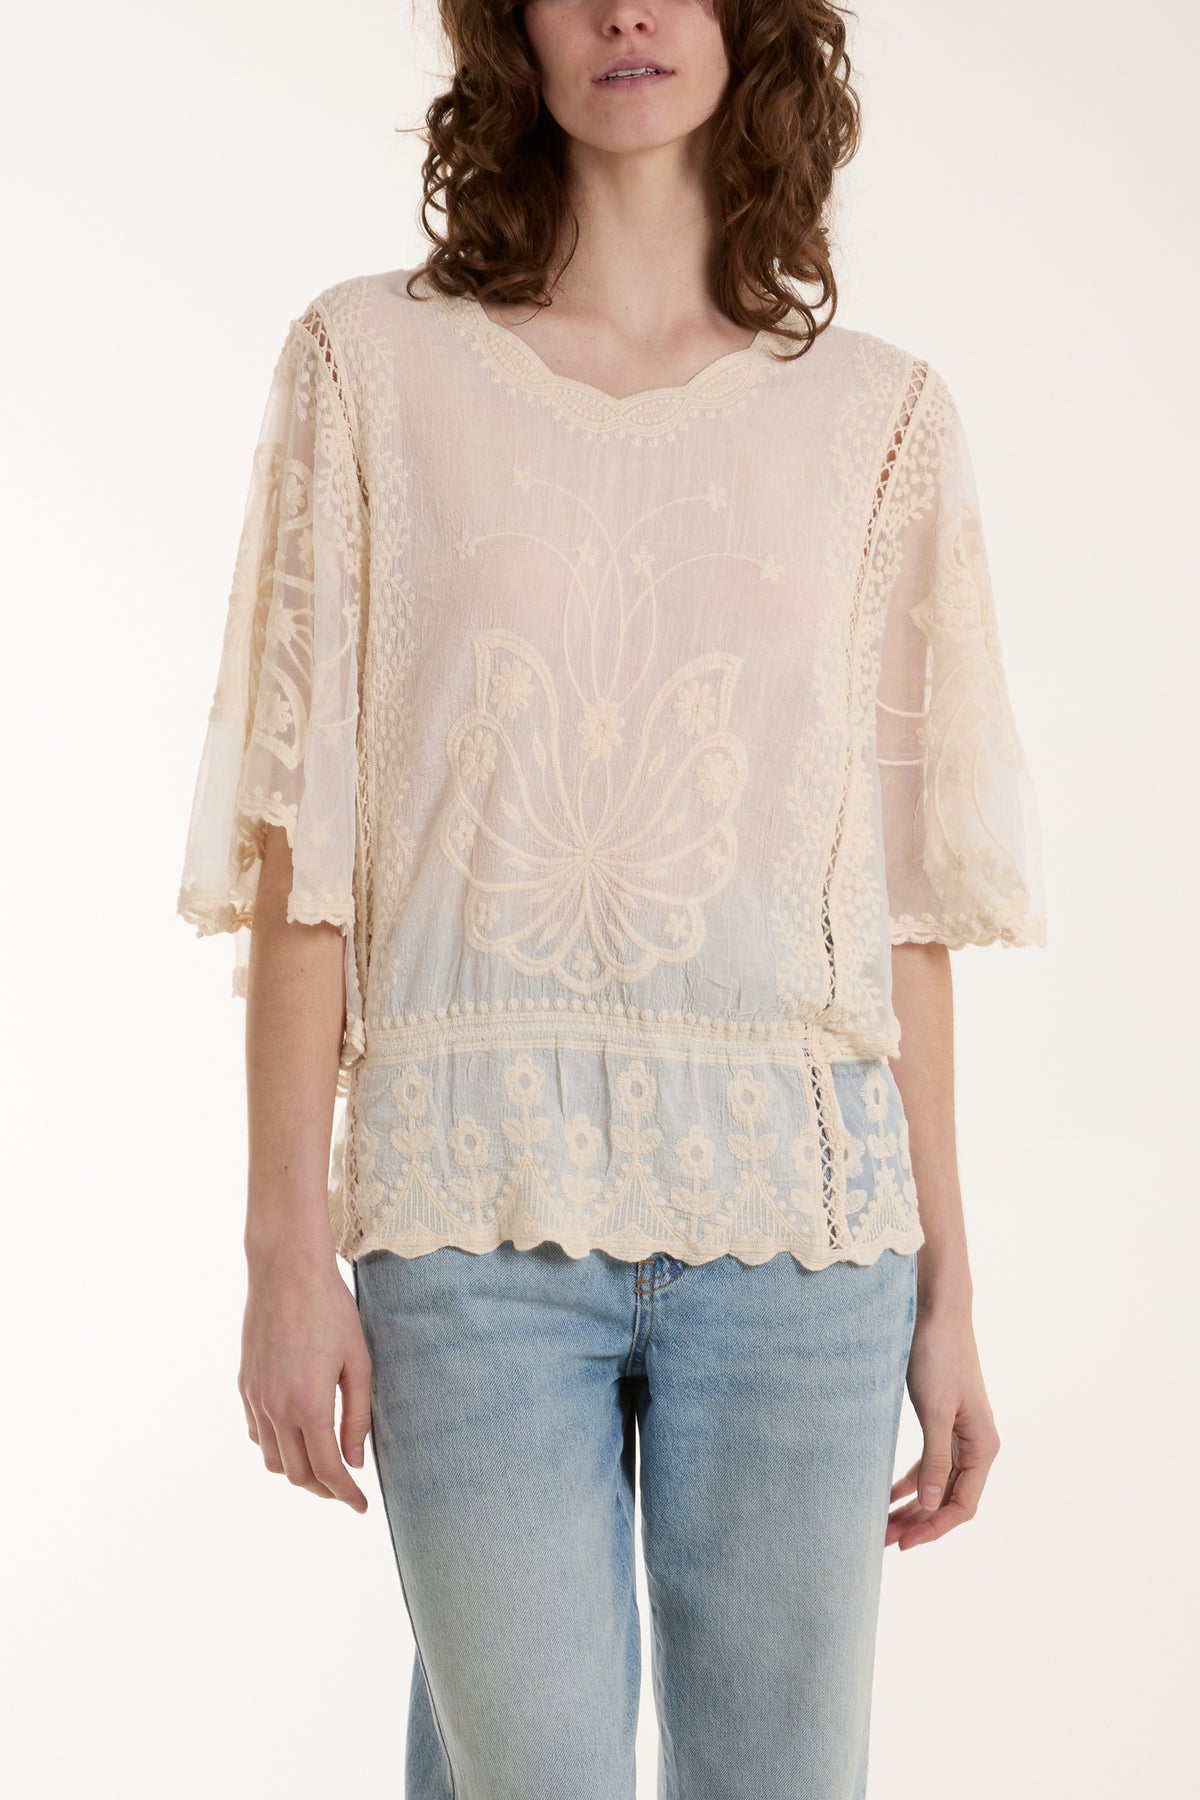 Stone Wash Lace Detail Top